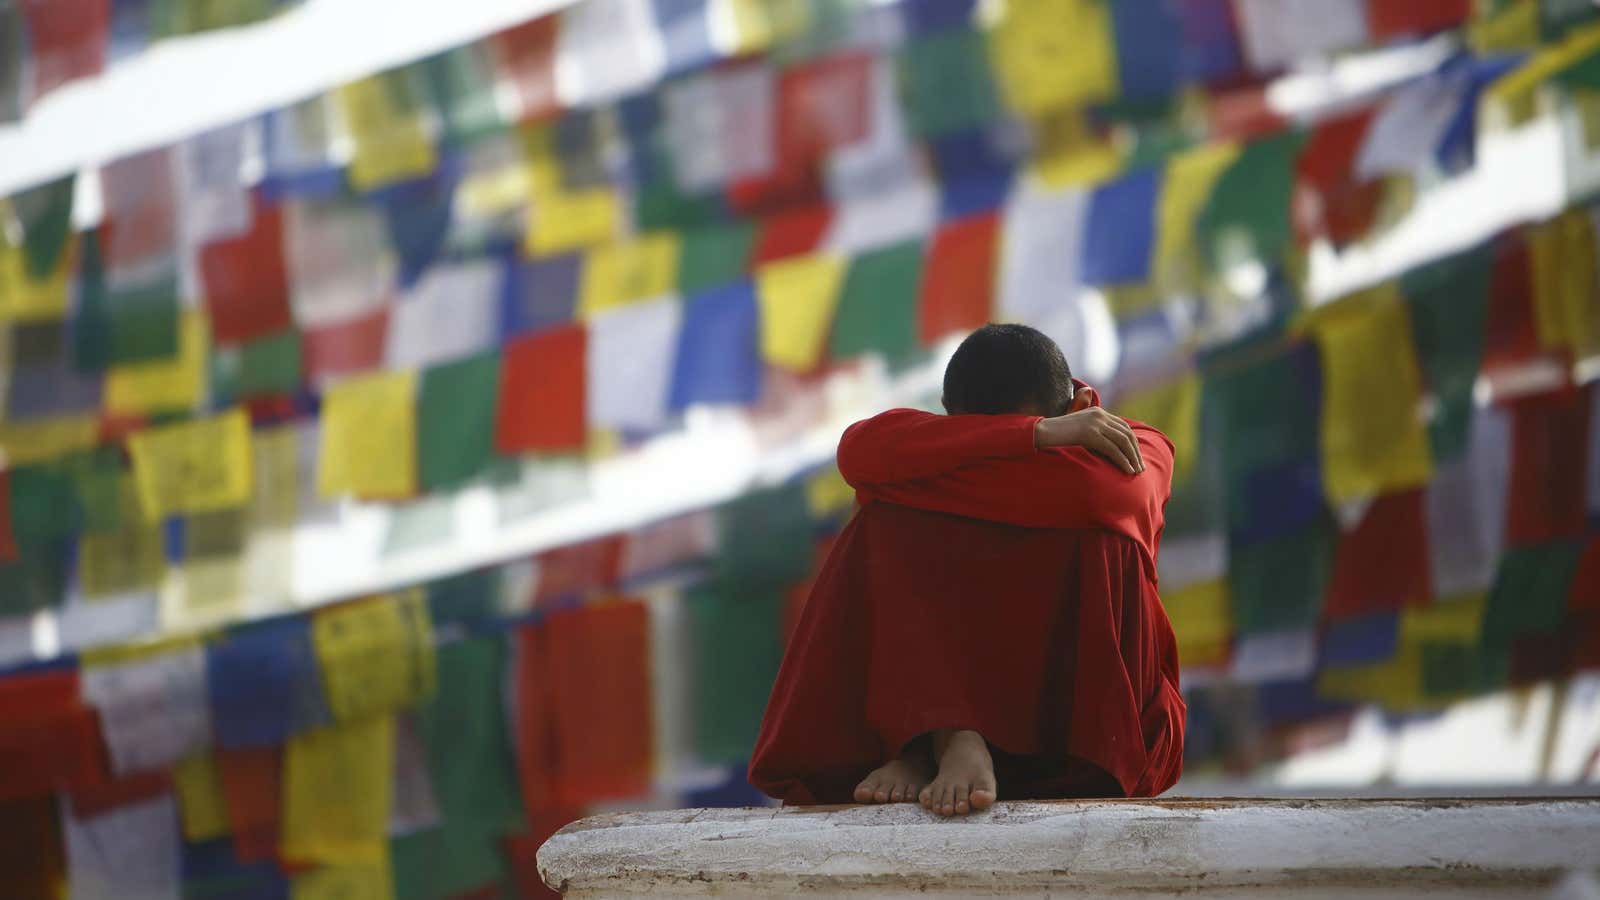 Not everyone thinks life is great in Tibet.